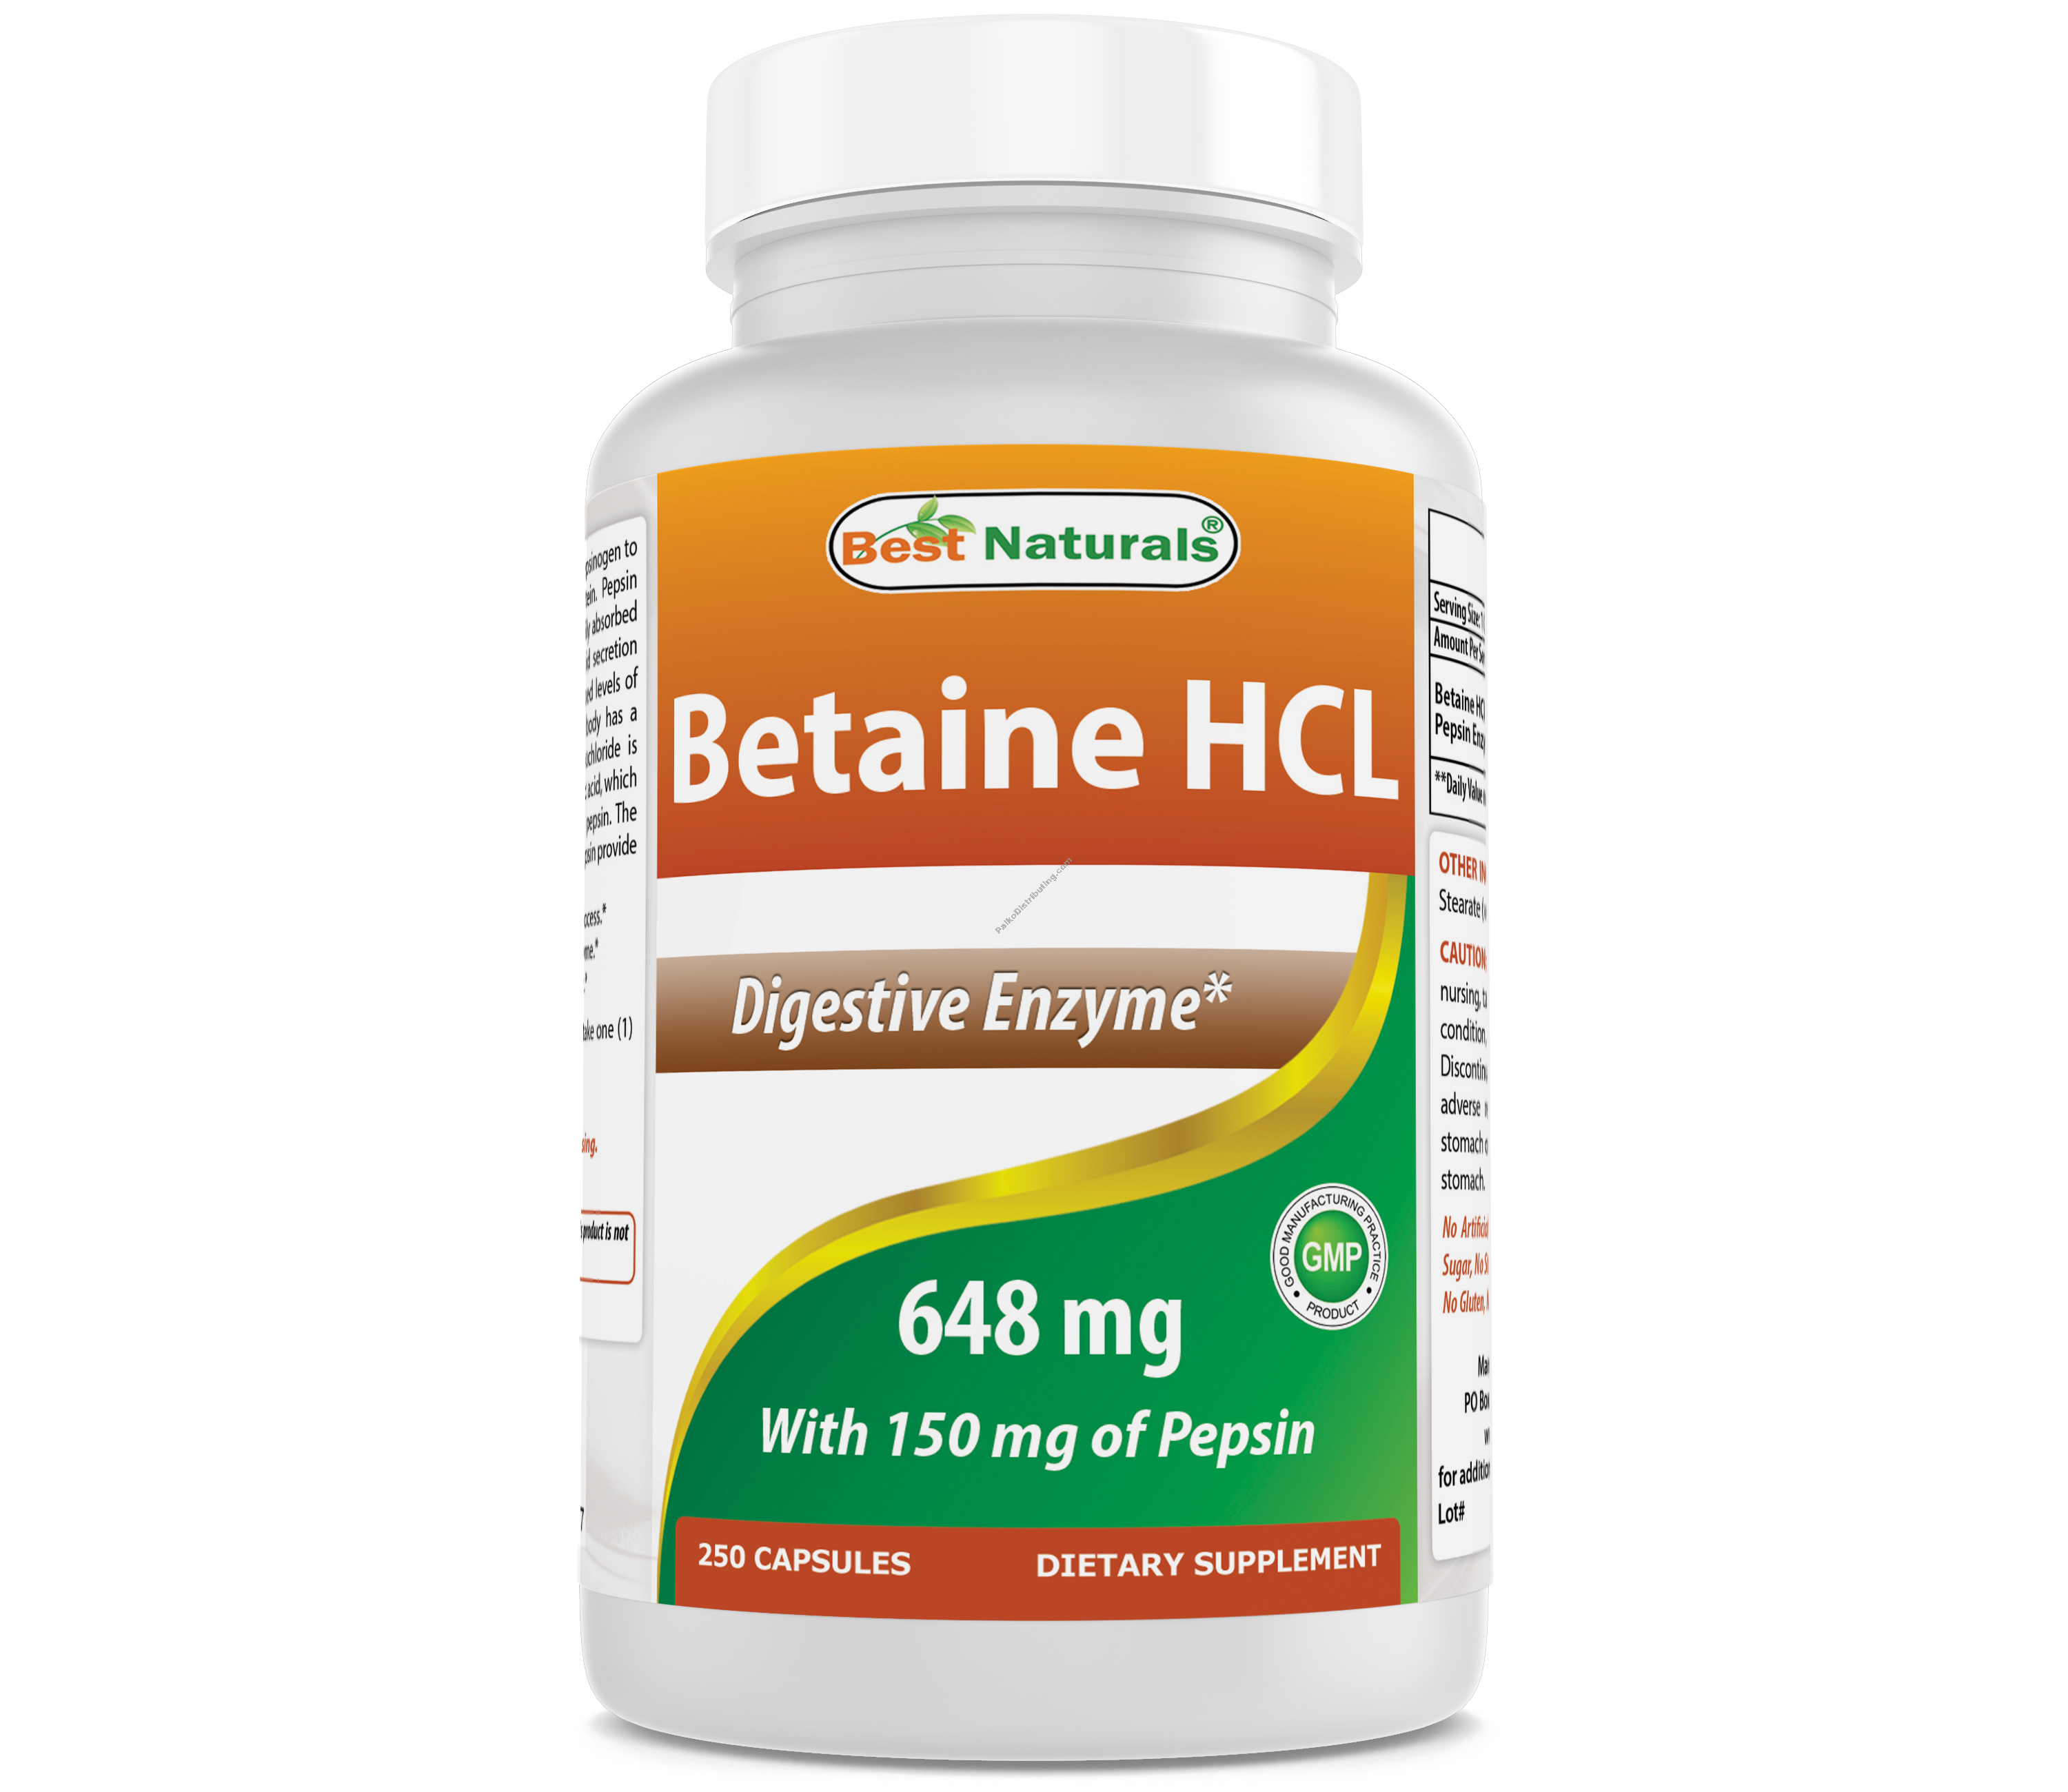 Product Image: Betaine HCI 648 mg